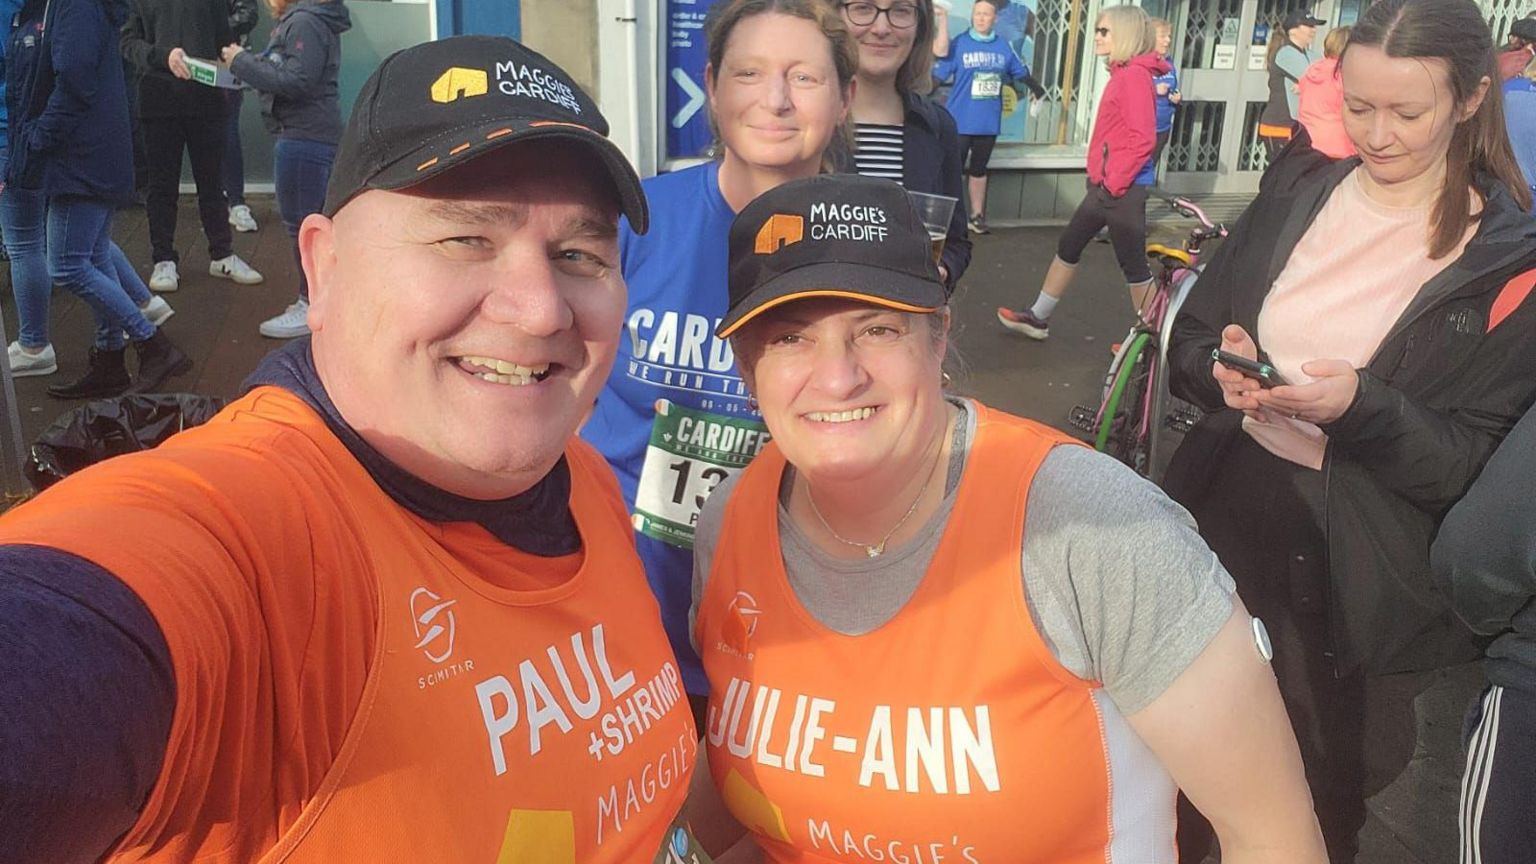 Paul and his friend Julie-Ann are taking a selfie before their race. They are both wearing their orange Maggie's racing bibs with their names on